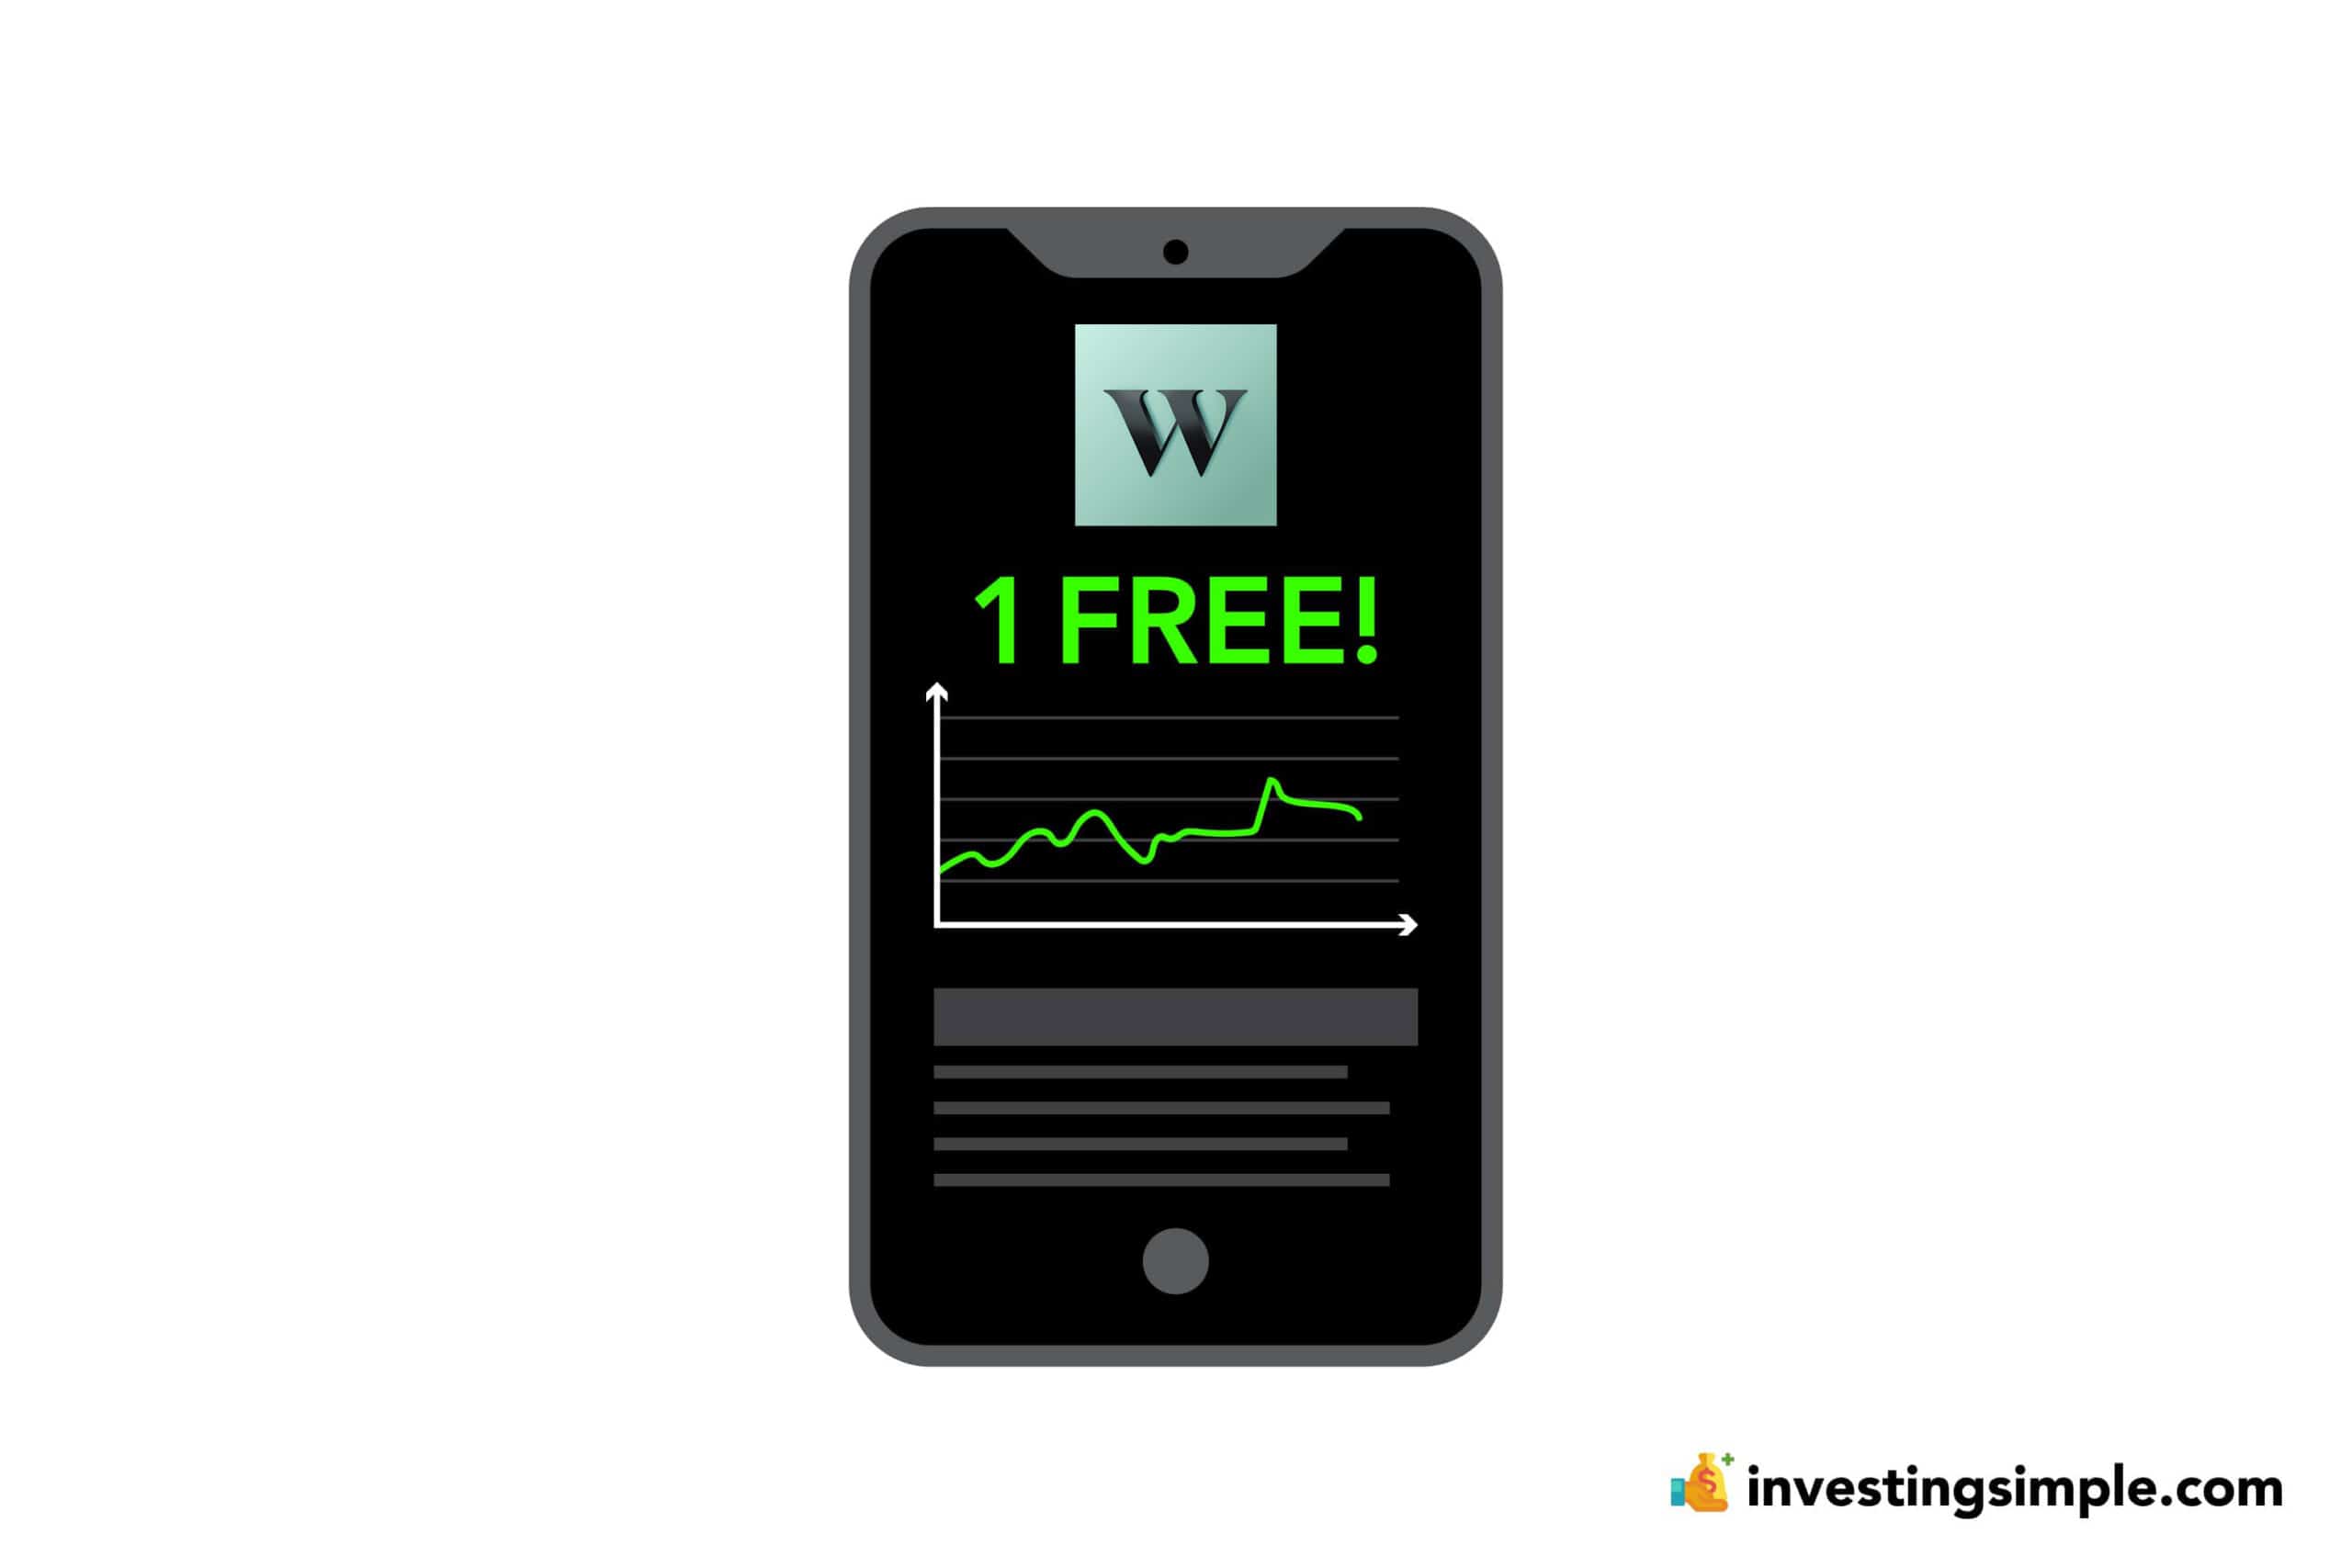 does Wealthsimple offer a free stock